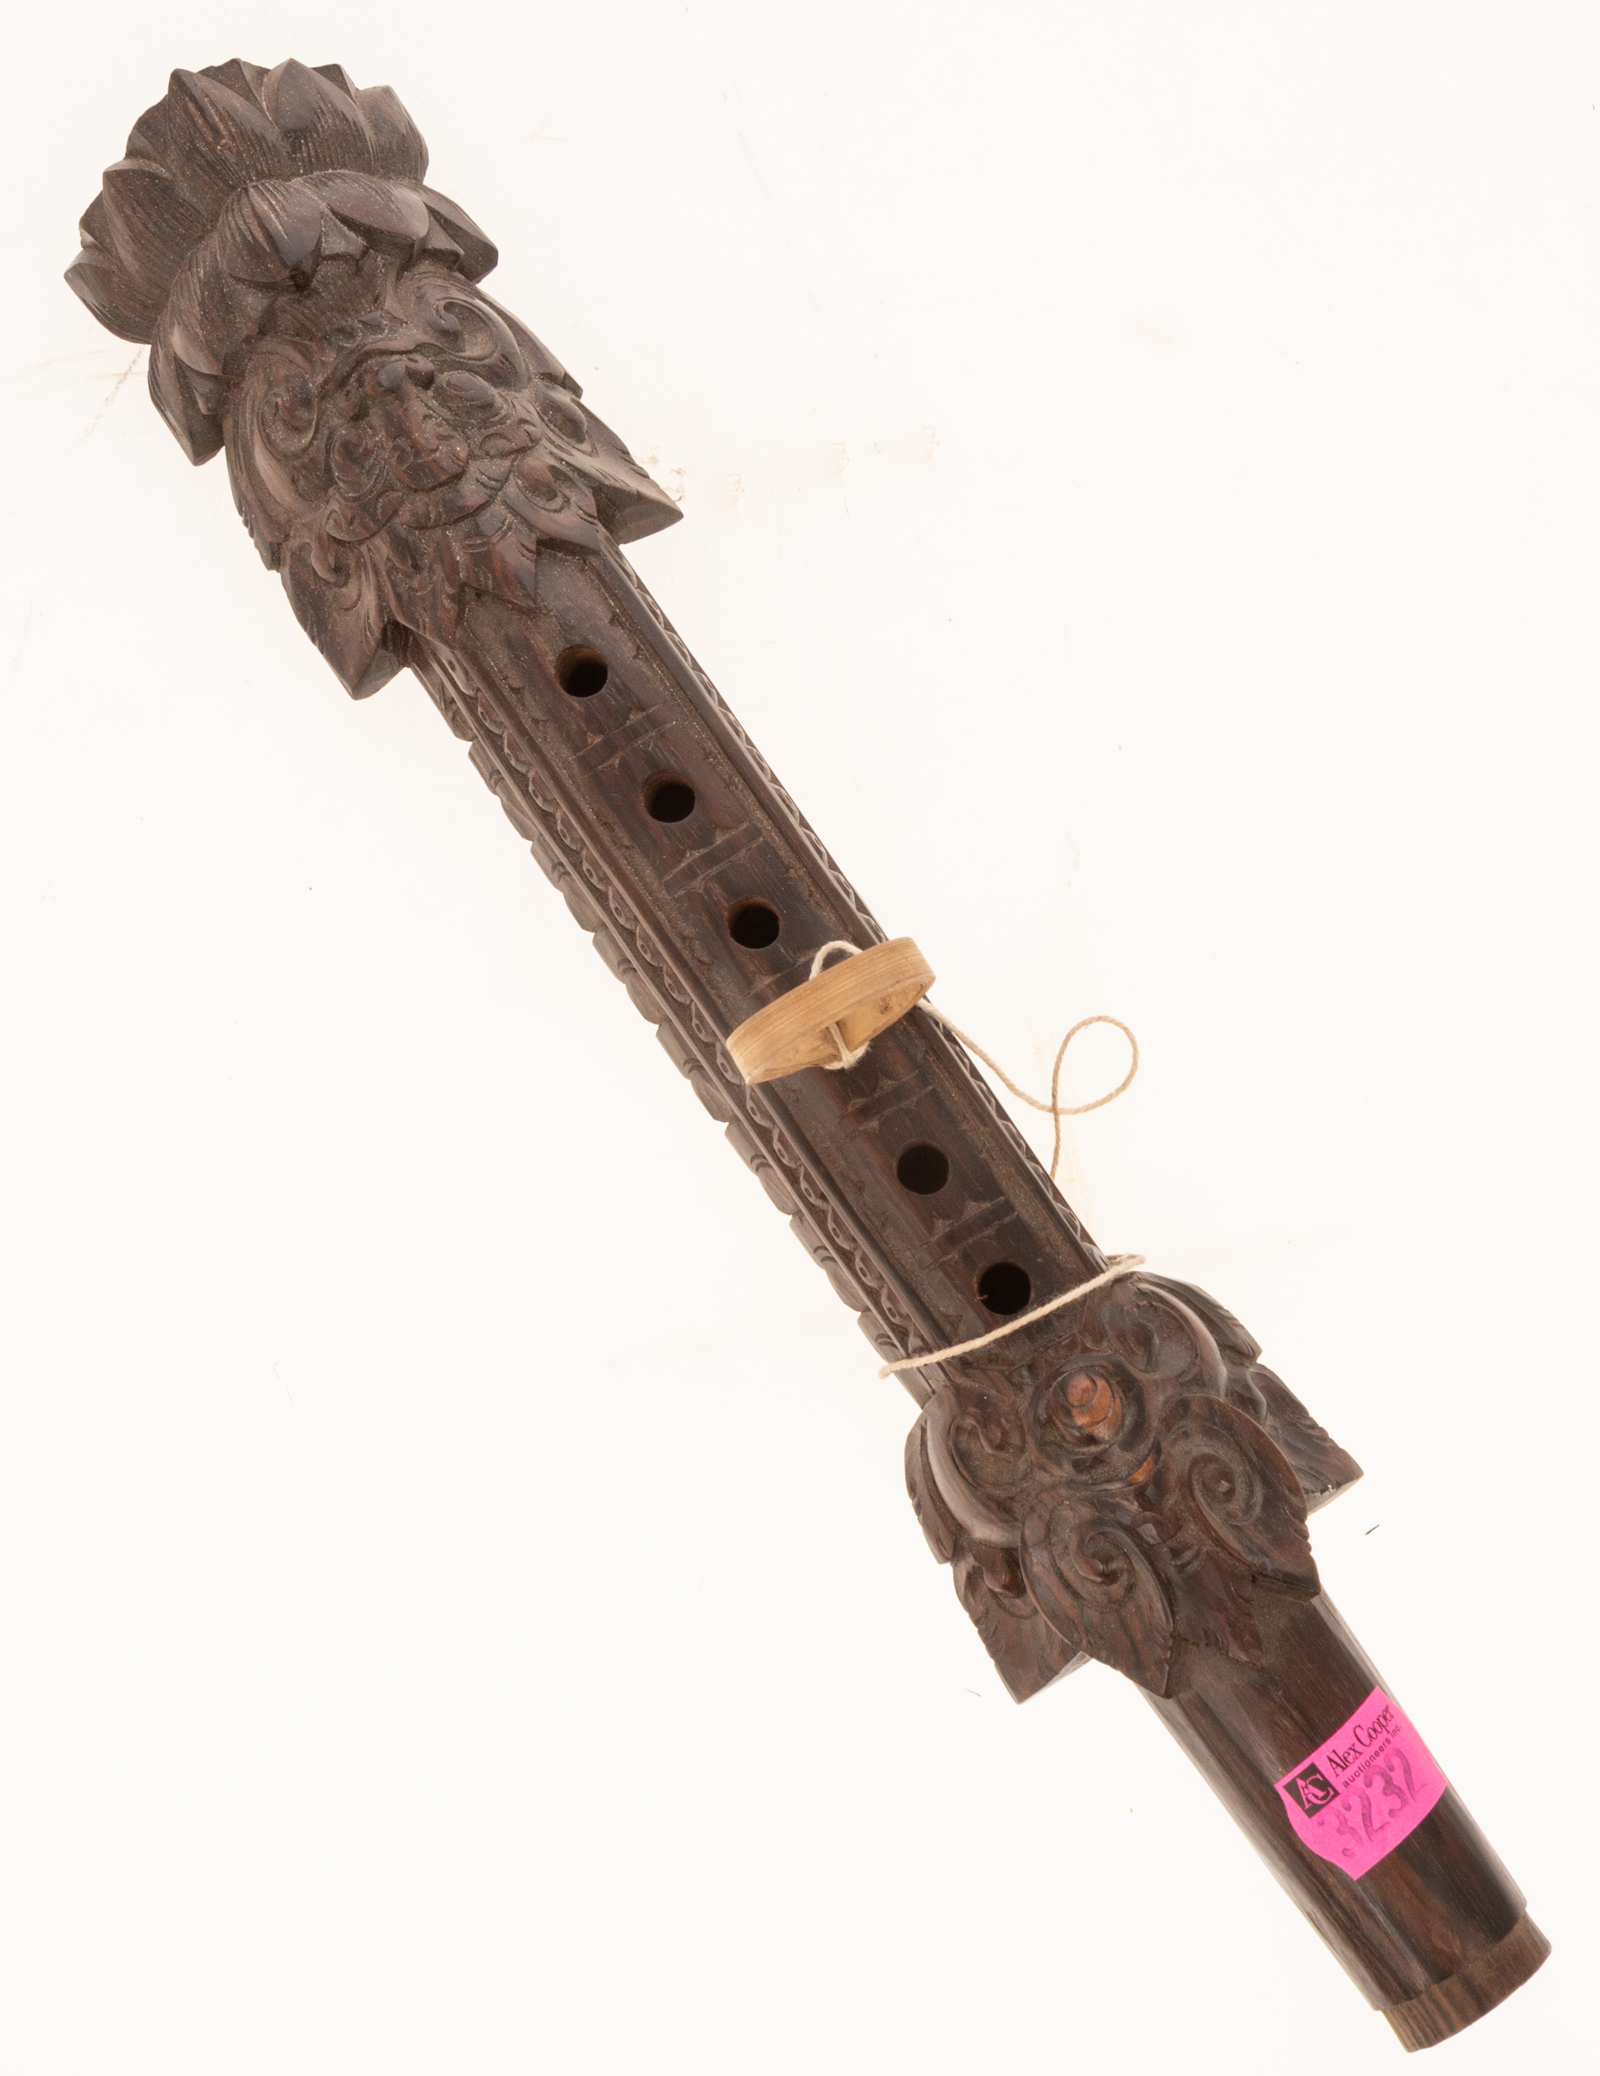 IATMUL FLUTE, CARVED WOOD From